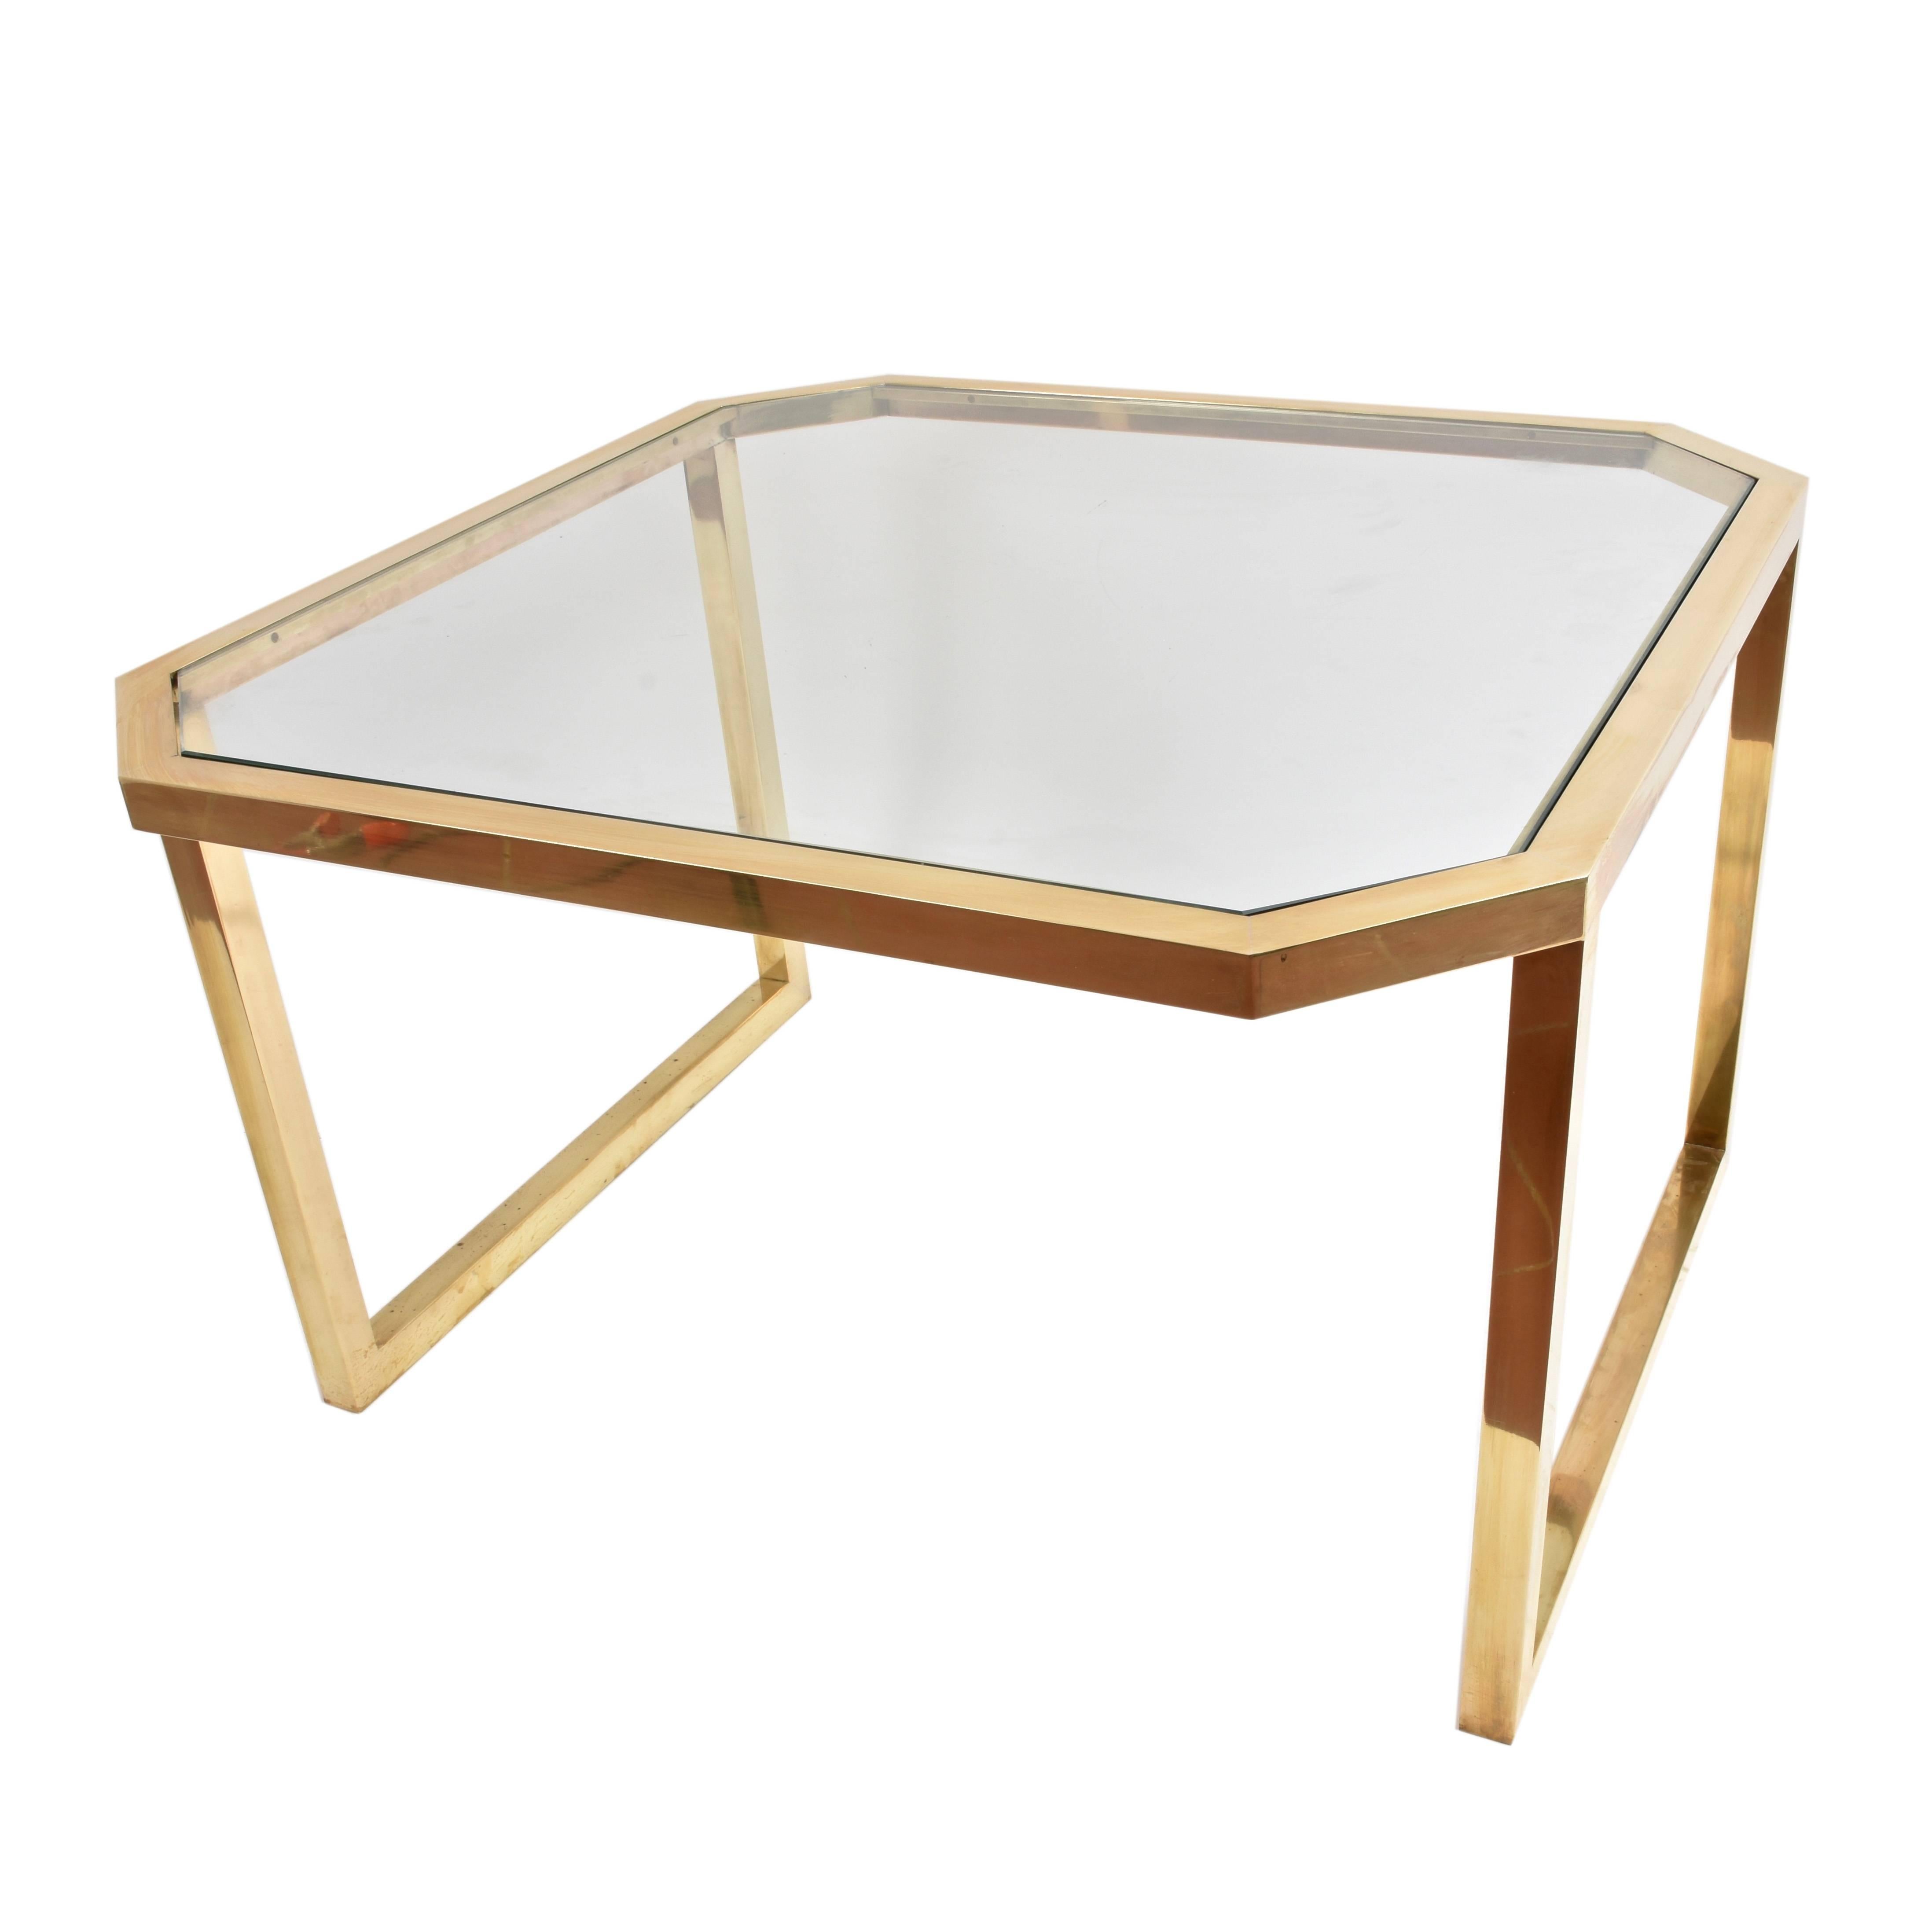 Italian Octagonal Brass Table and Glass Top, Italy, 1970s, Mid-Century Modern